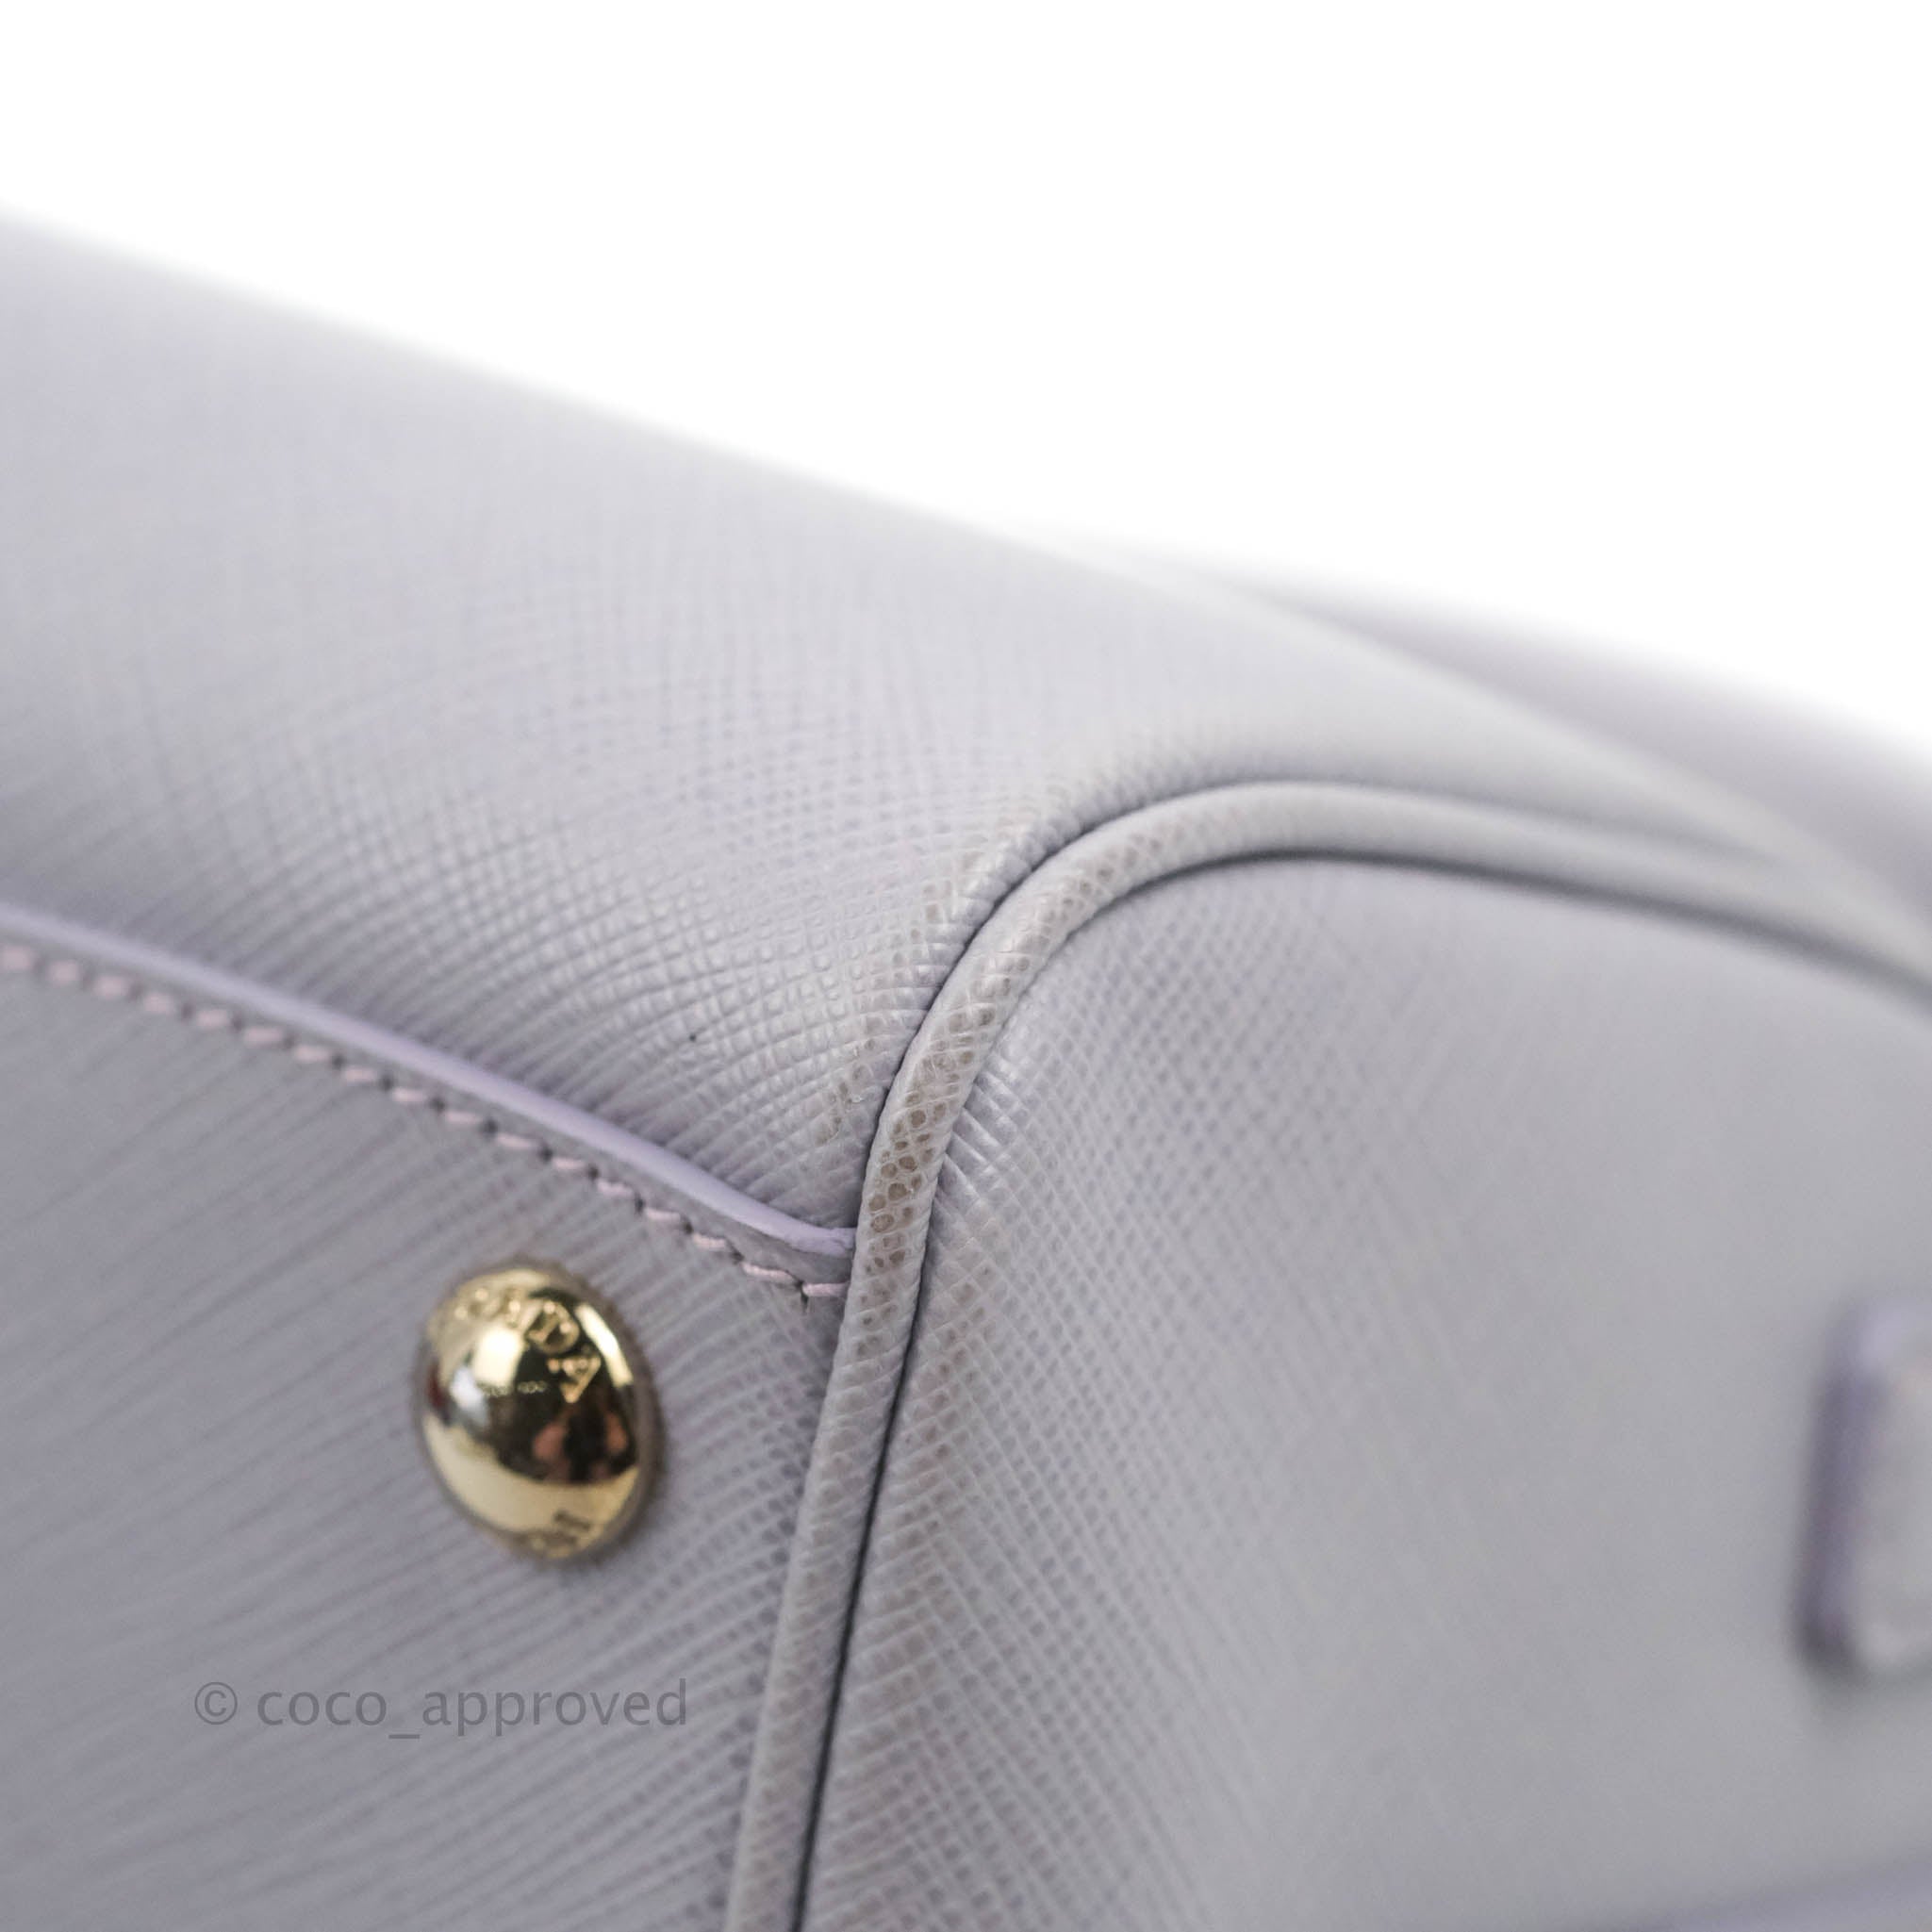 Sold at Auction: Prada Lavender Saffiano Leather Small Bauletto Bag